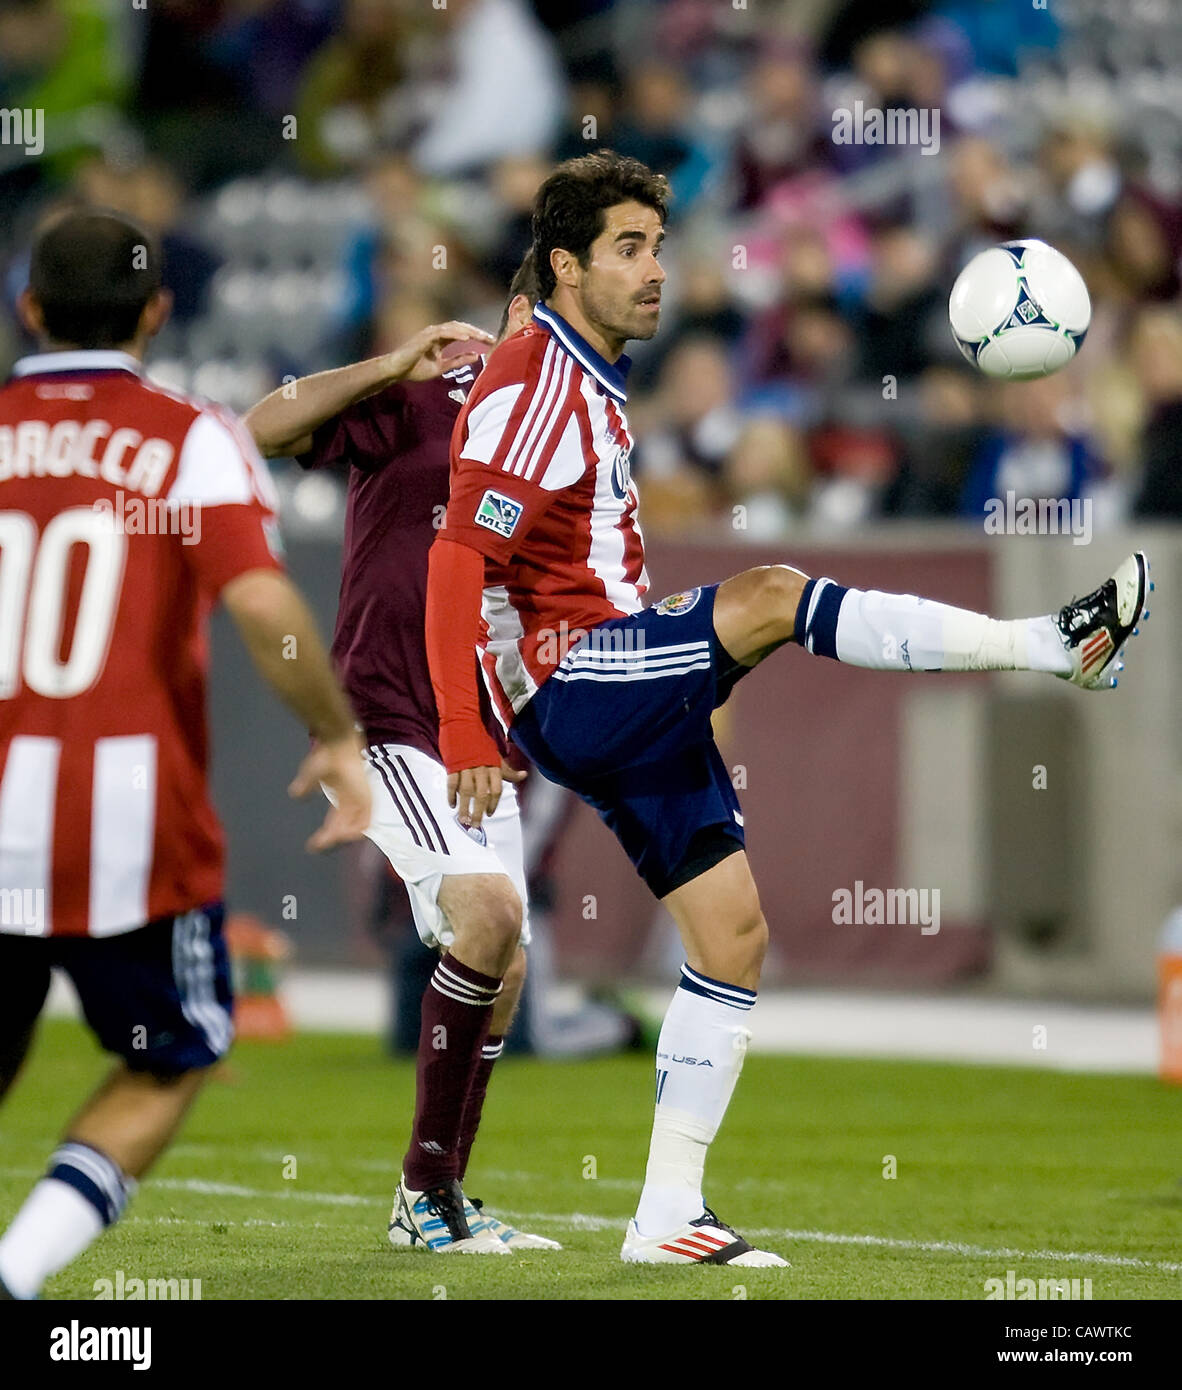 April 28, 2012 - Commerce City, CO, USA - JUAN PABLO ANGEL, center, of the CHIVAS USA controls the ball in traffic during the 2nd. half at Dicks Sporting Goods Park Saturday night. The Rapids defeat Chivas USA 4-0. (Credit Image: © Hector Acevedo/ZUMAPRESS.com) Stock Photo